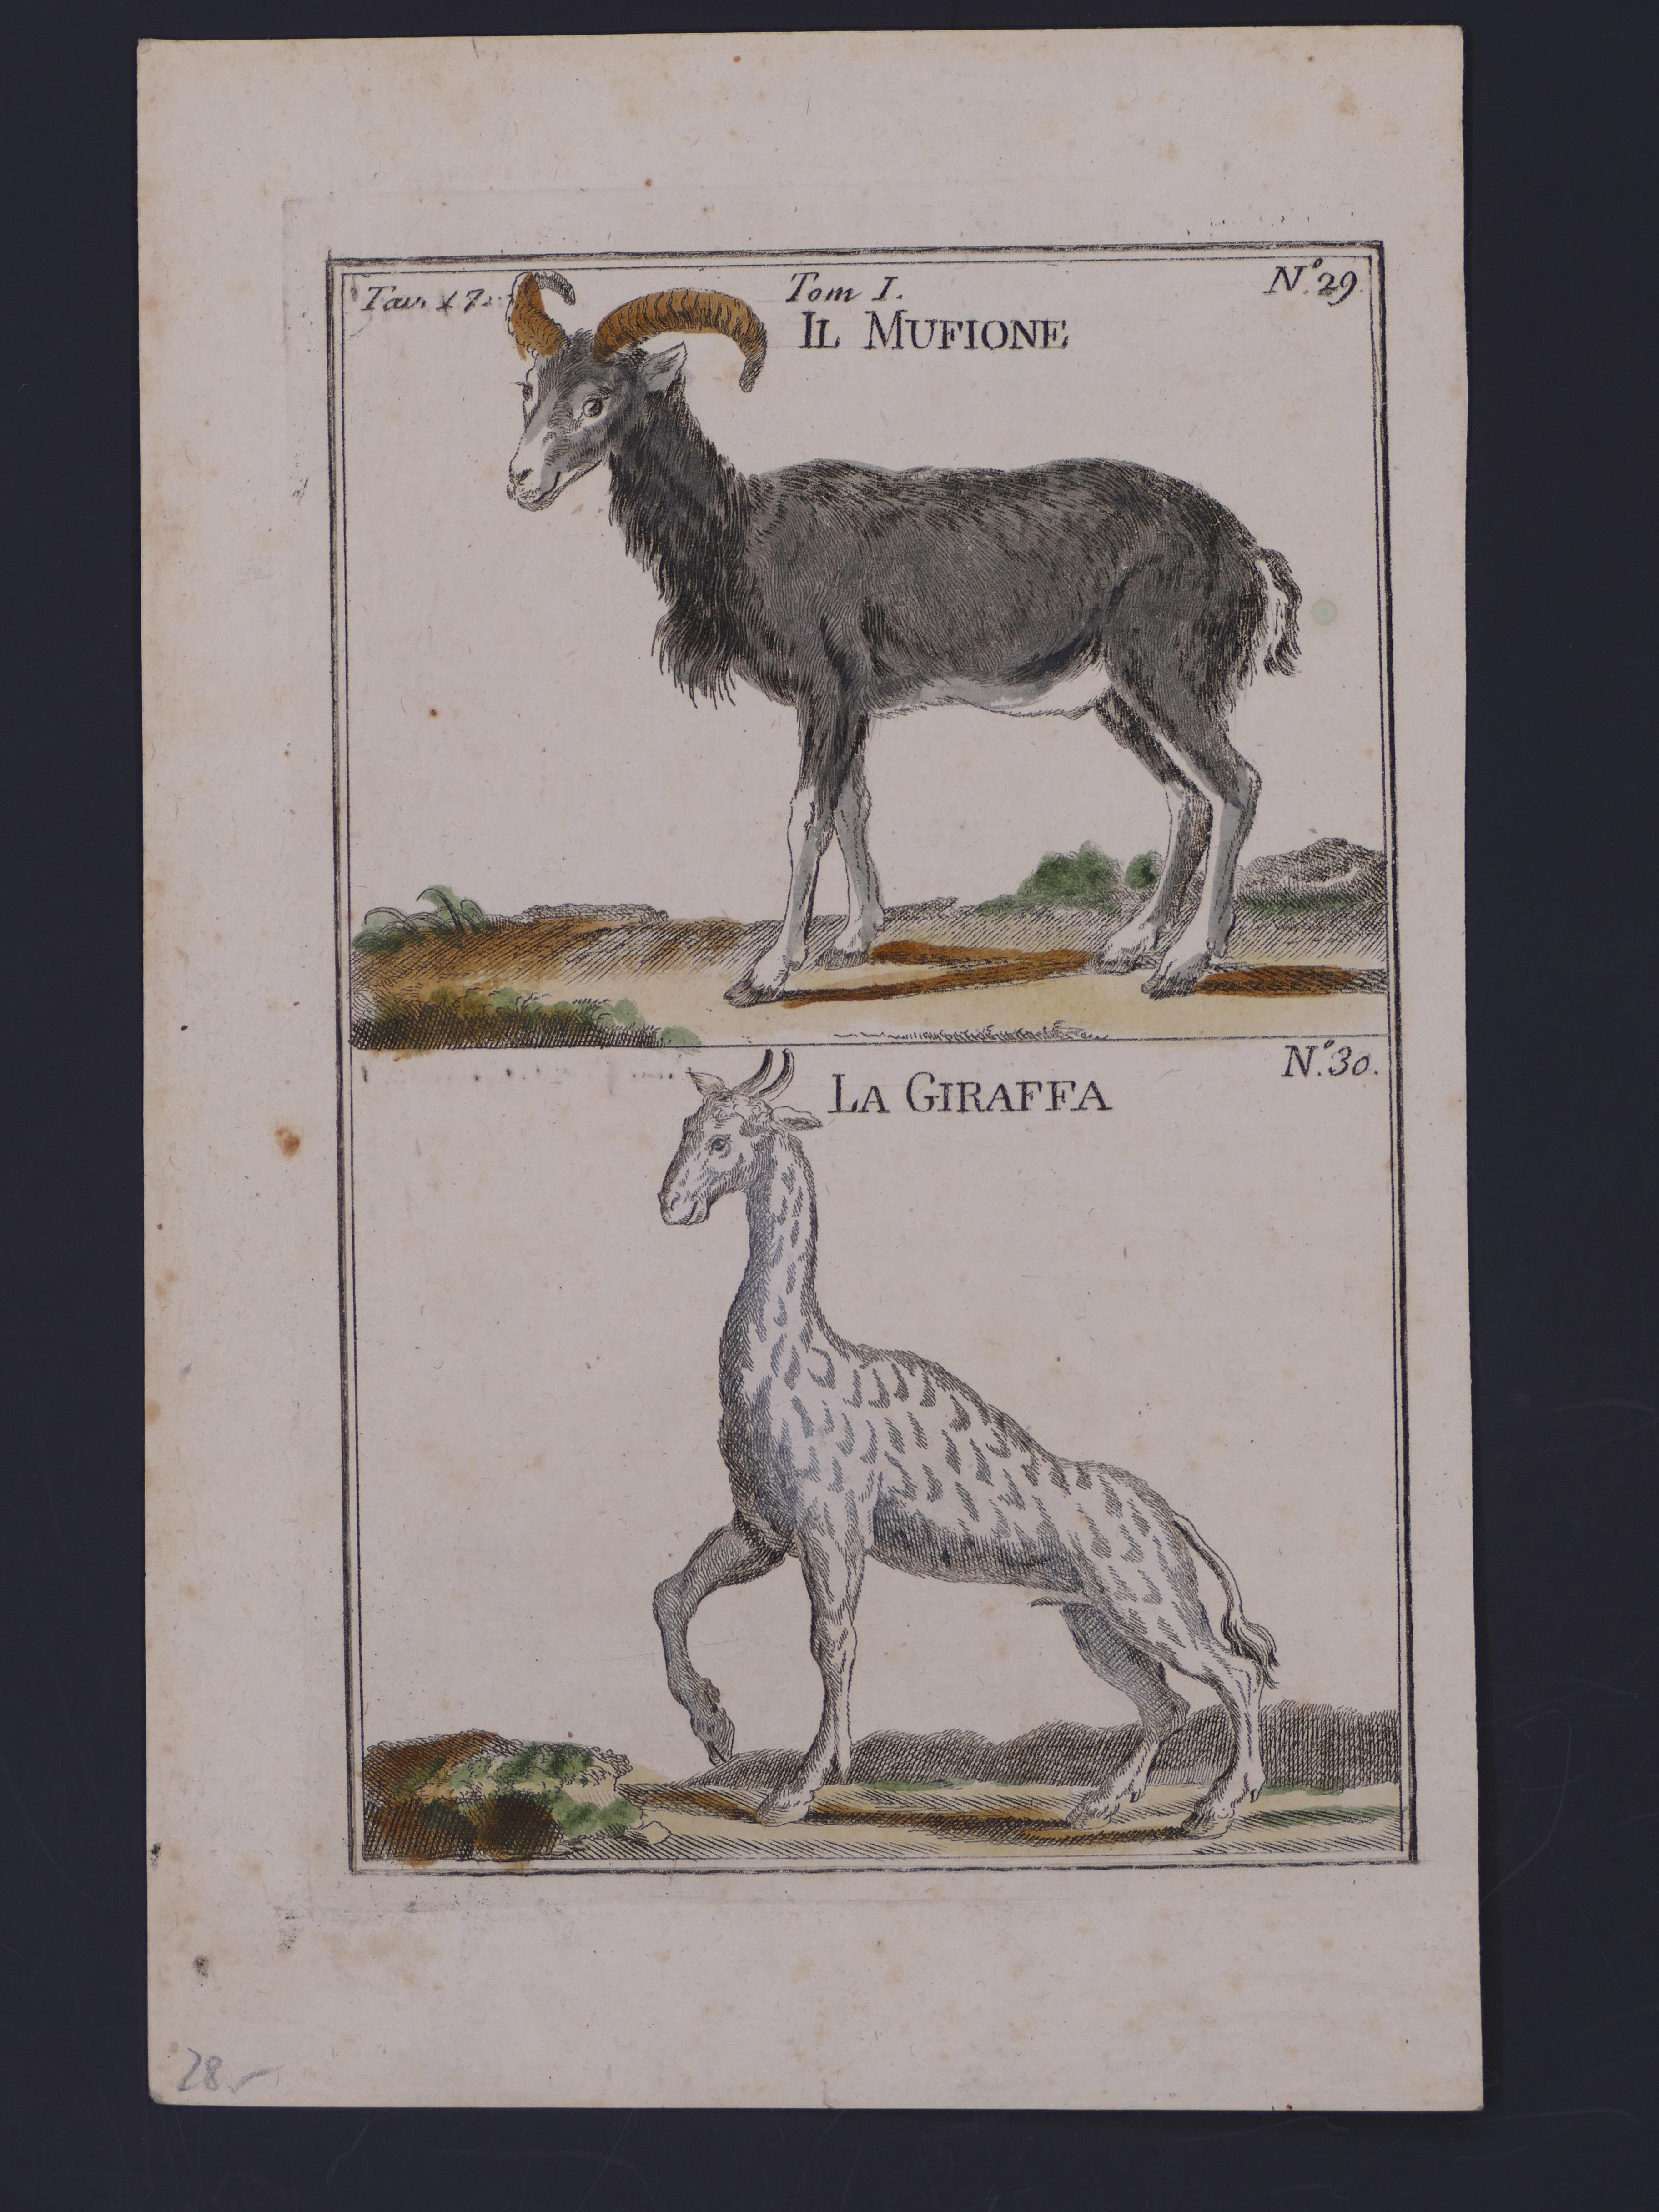 A Mouflon and A Giraffe - Original Etching - 17th Century - Gray Figurative Print by Unknown